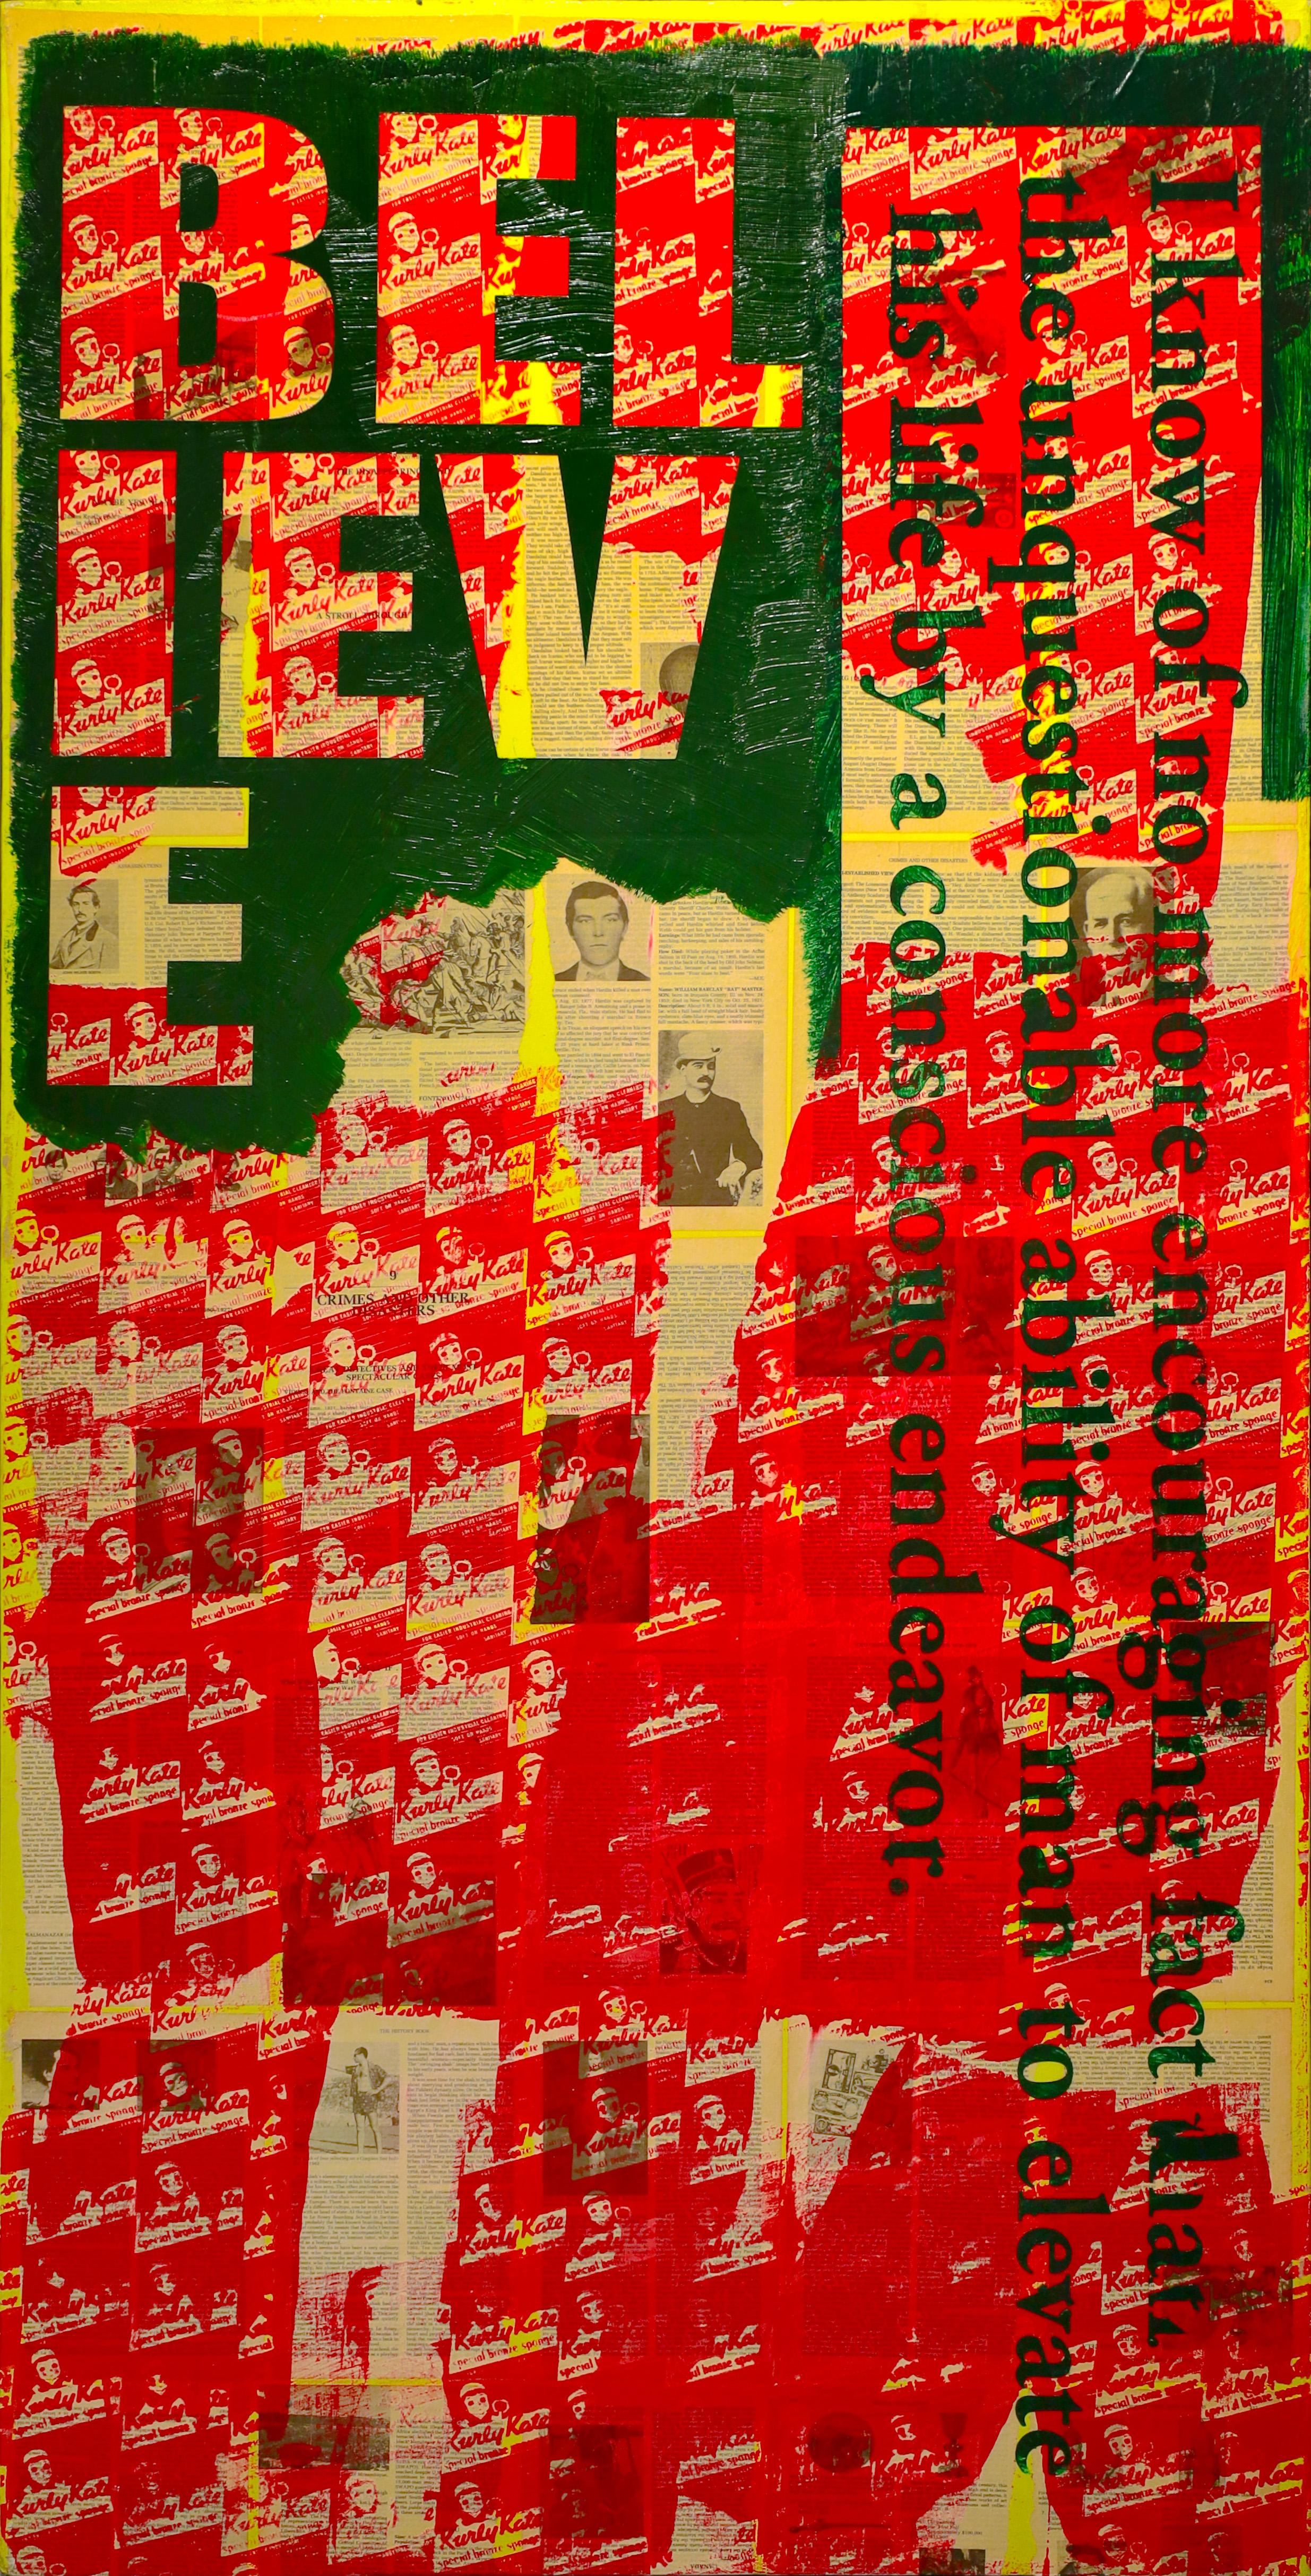 Peter Tunney 'Believe' is a Unique Painting and Mixed Media on Canvas made in 2015. Made of Acrylic paint and collaged with newspaper clipping and book pages, stenciled typography and screen print. Signed by the Artist on verso.

Peter Tunney is a